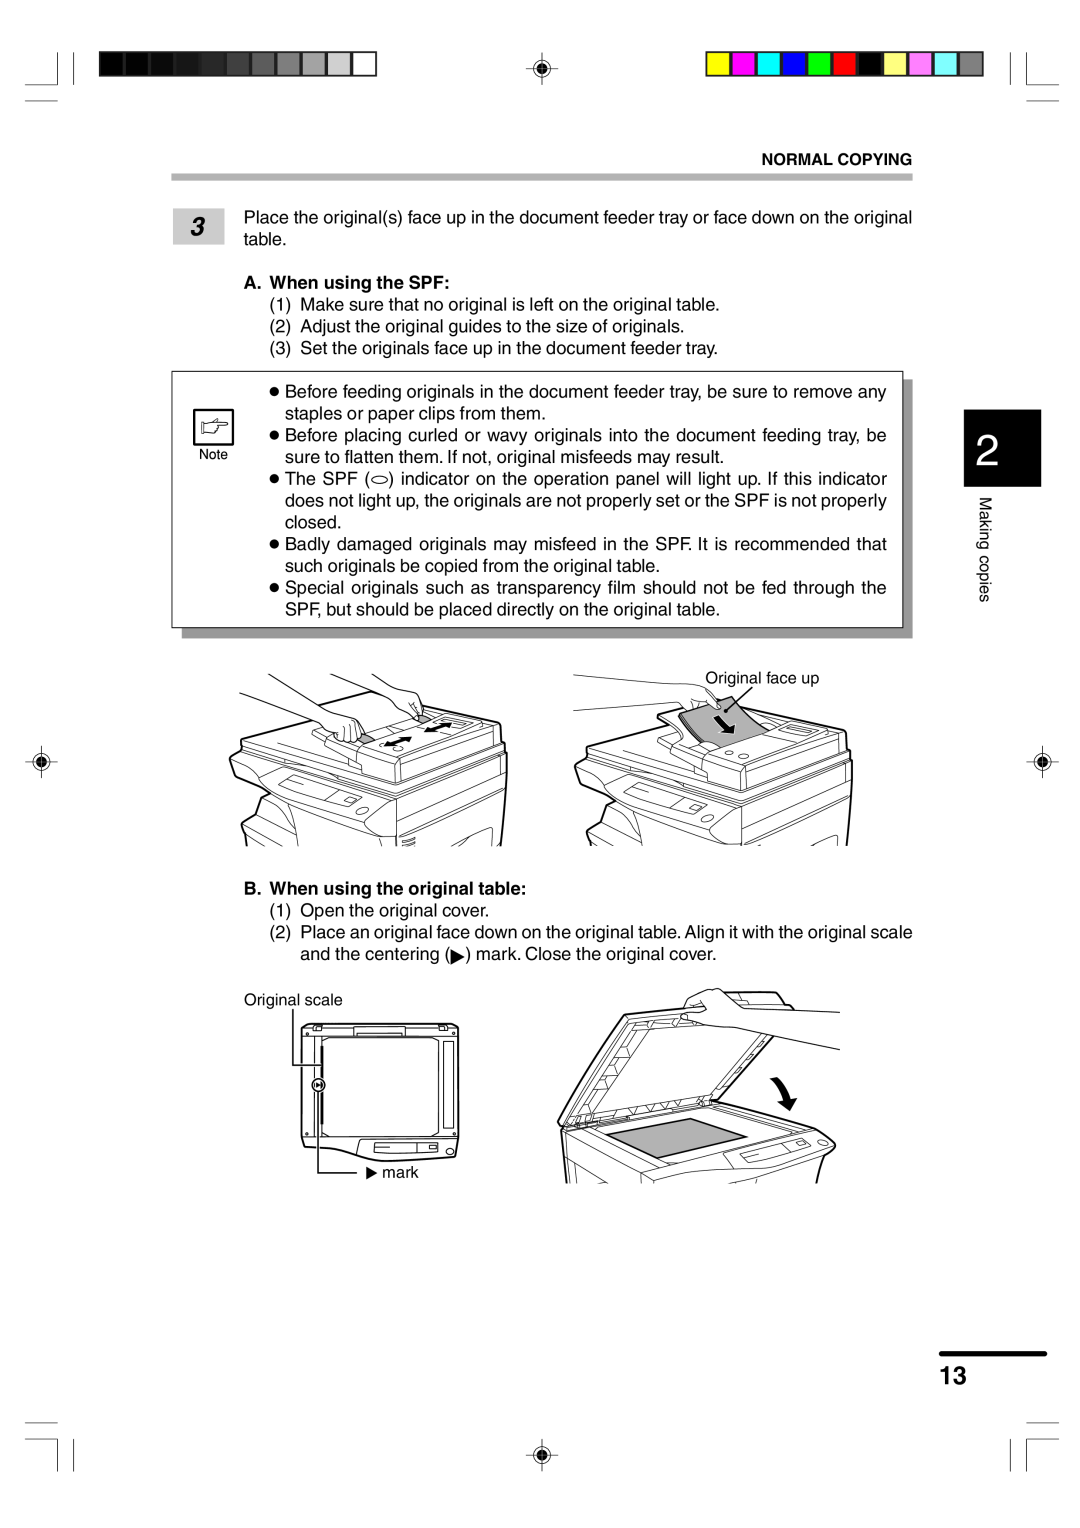 Sharp AR-F152 operation manual A. When using the SPF, B. When using the original table 